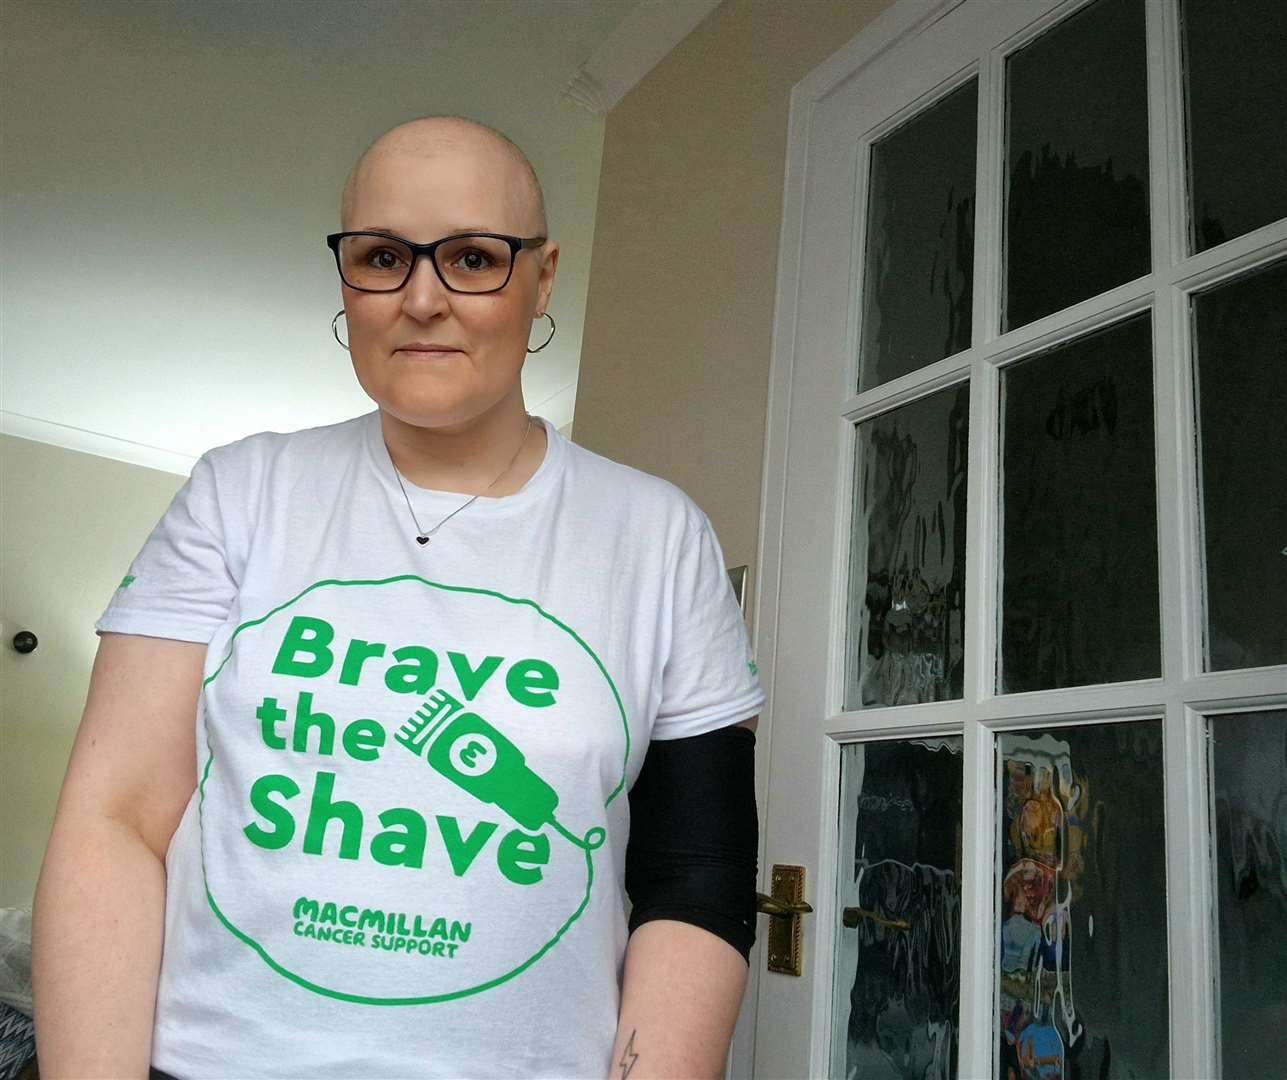 Kimberley Forsyth has shaved off her hair while undergoing chemo. She says: "It can get gone, I'm too busy living."